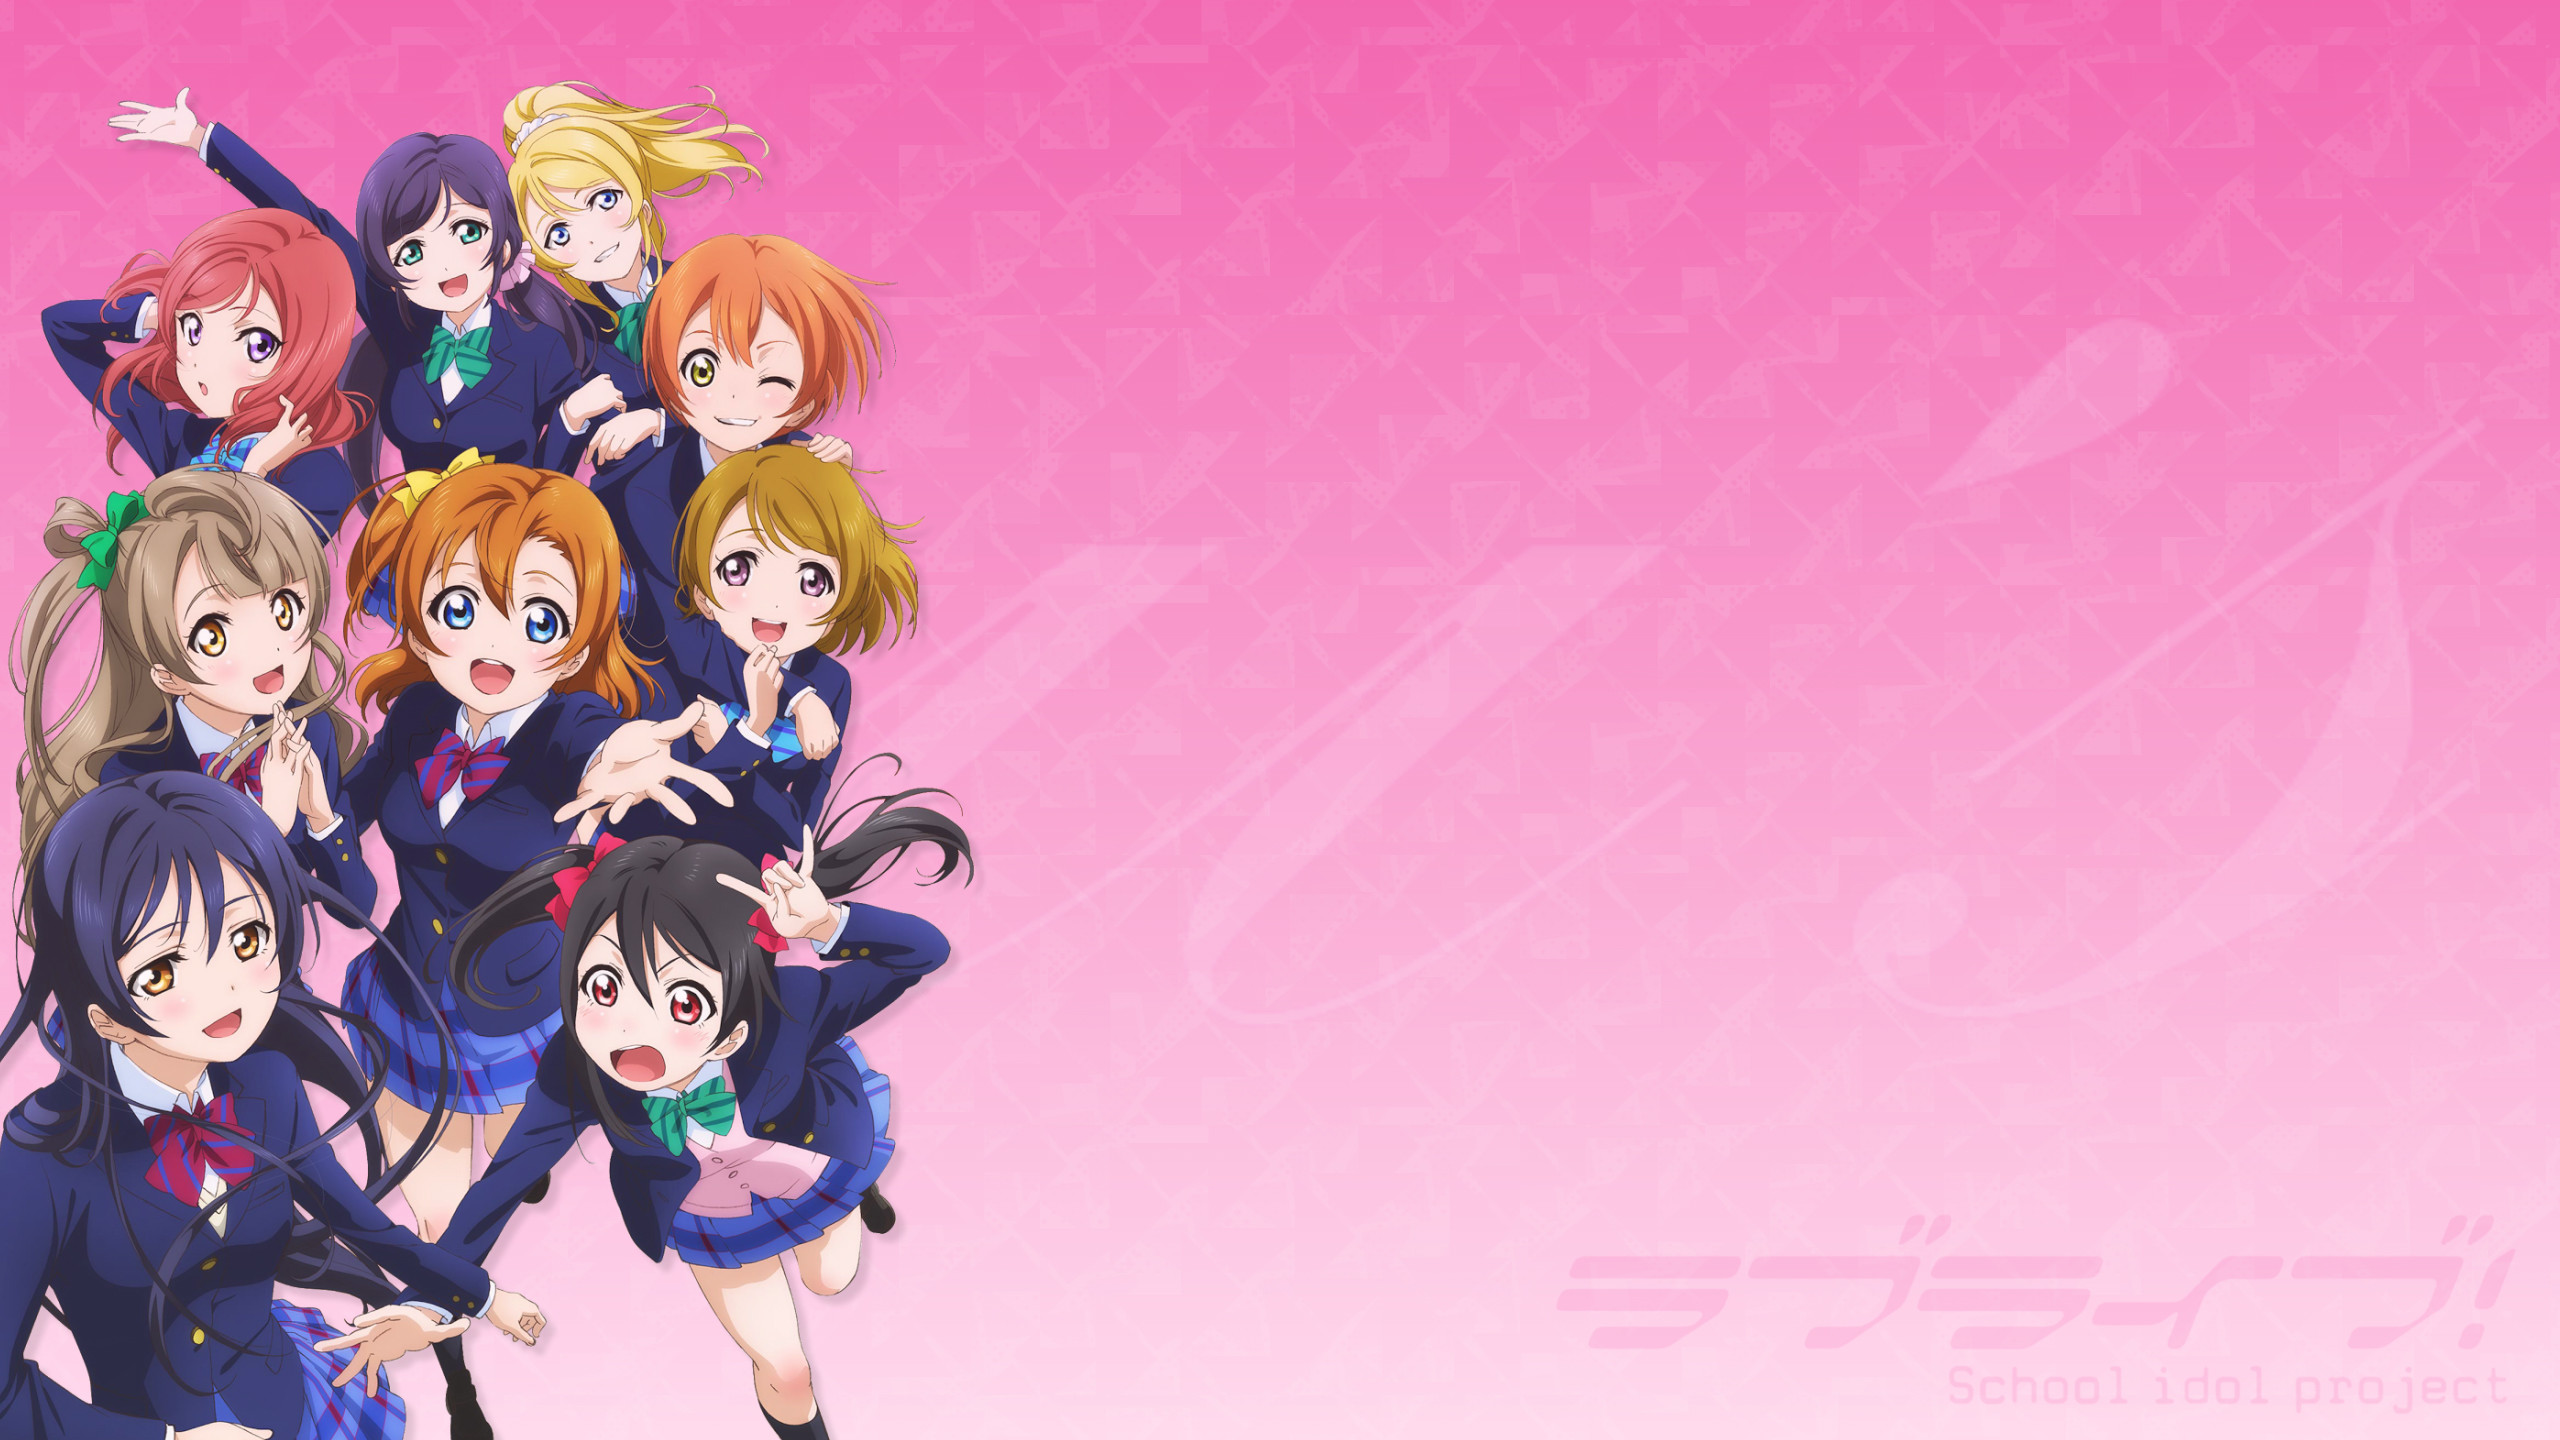 Tree of Love Live Wallpaper Android Apps on Google Play 19201080 Love Live Wallpapers